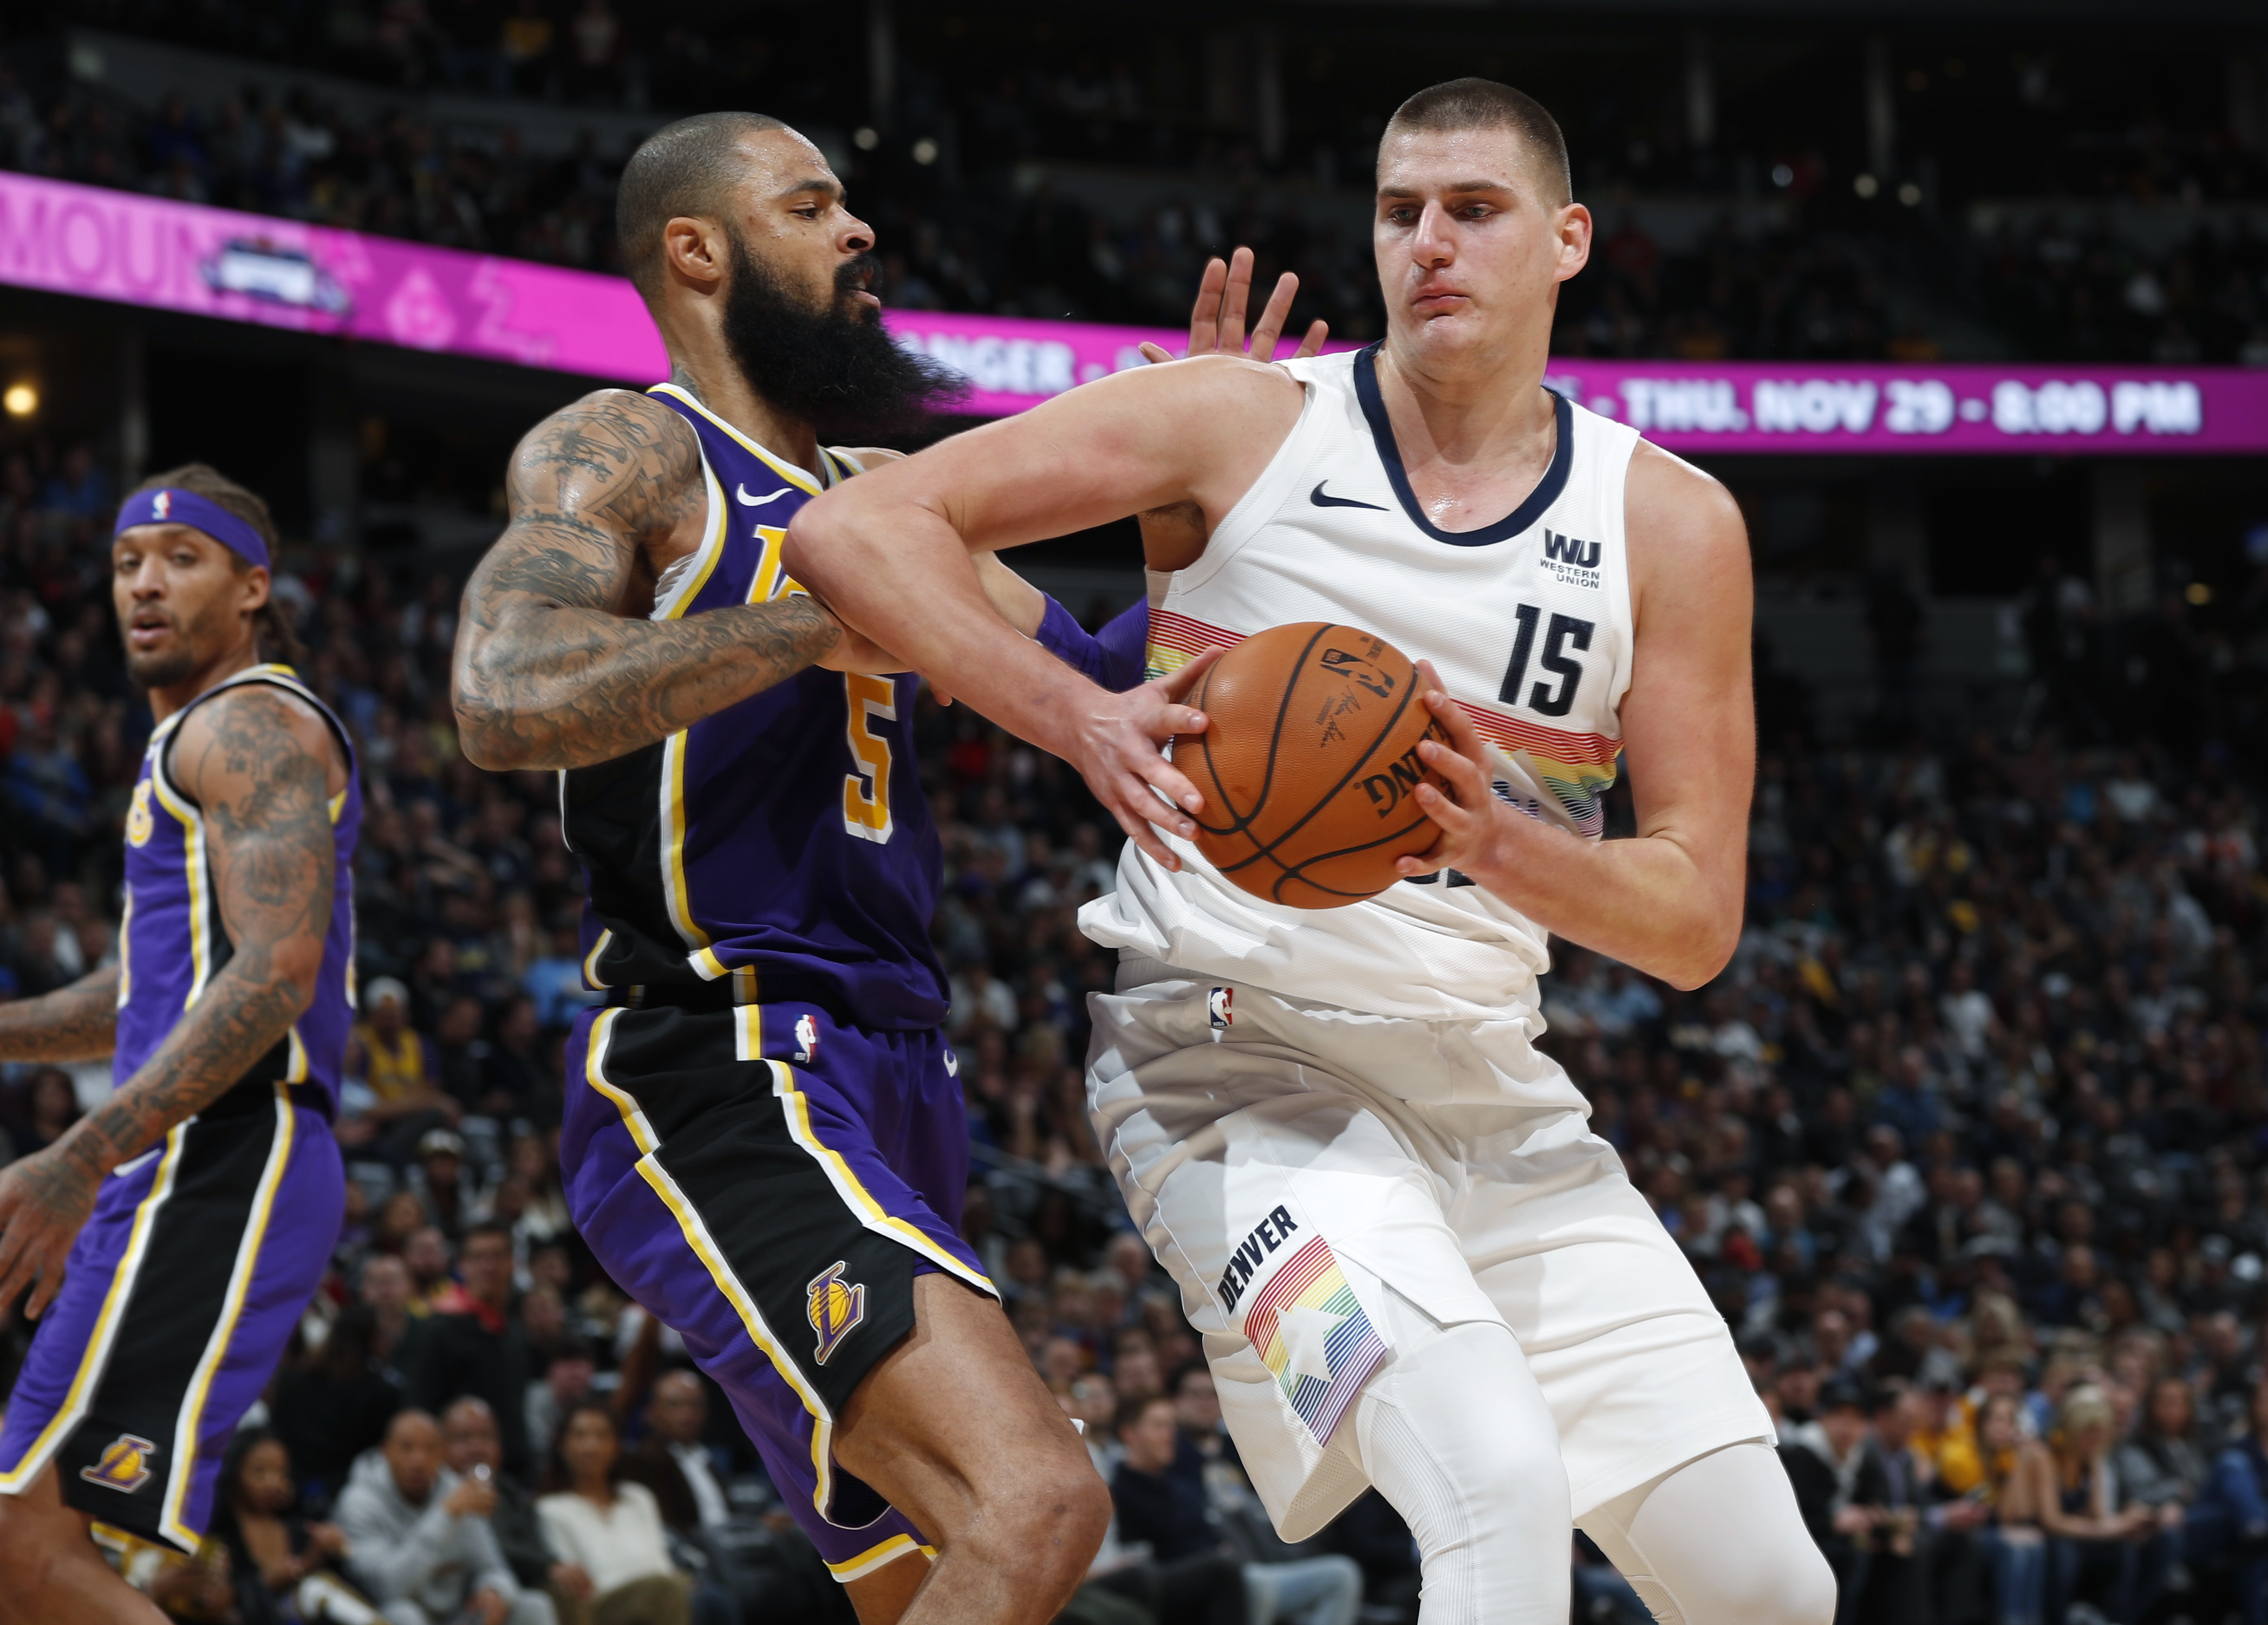 Nuggets win 117-85 in their biggest rout ever of Lakers